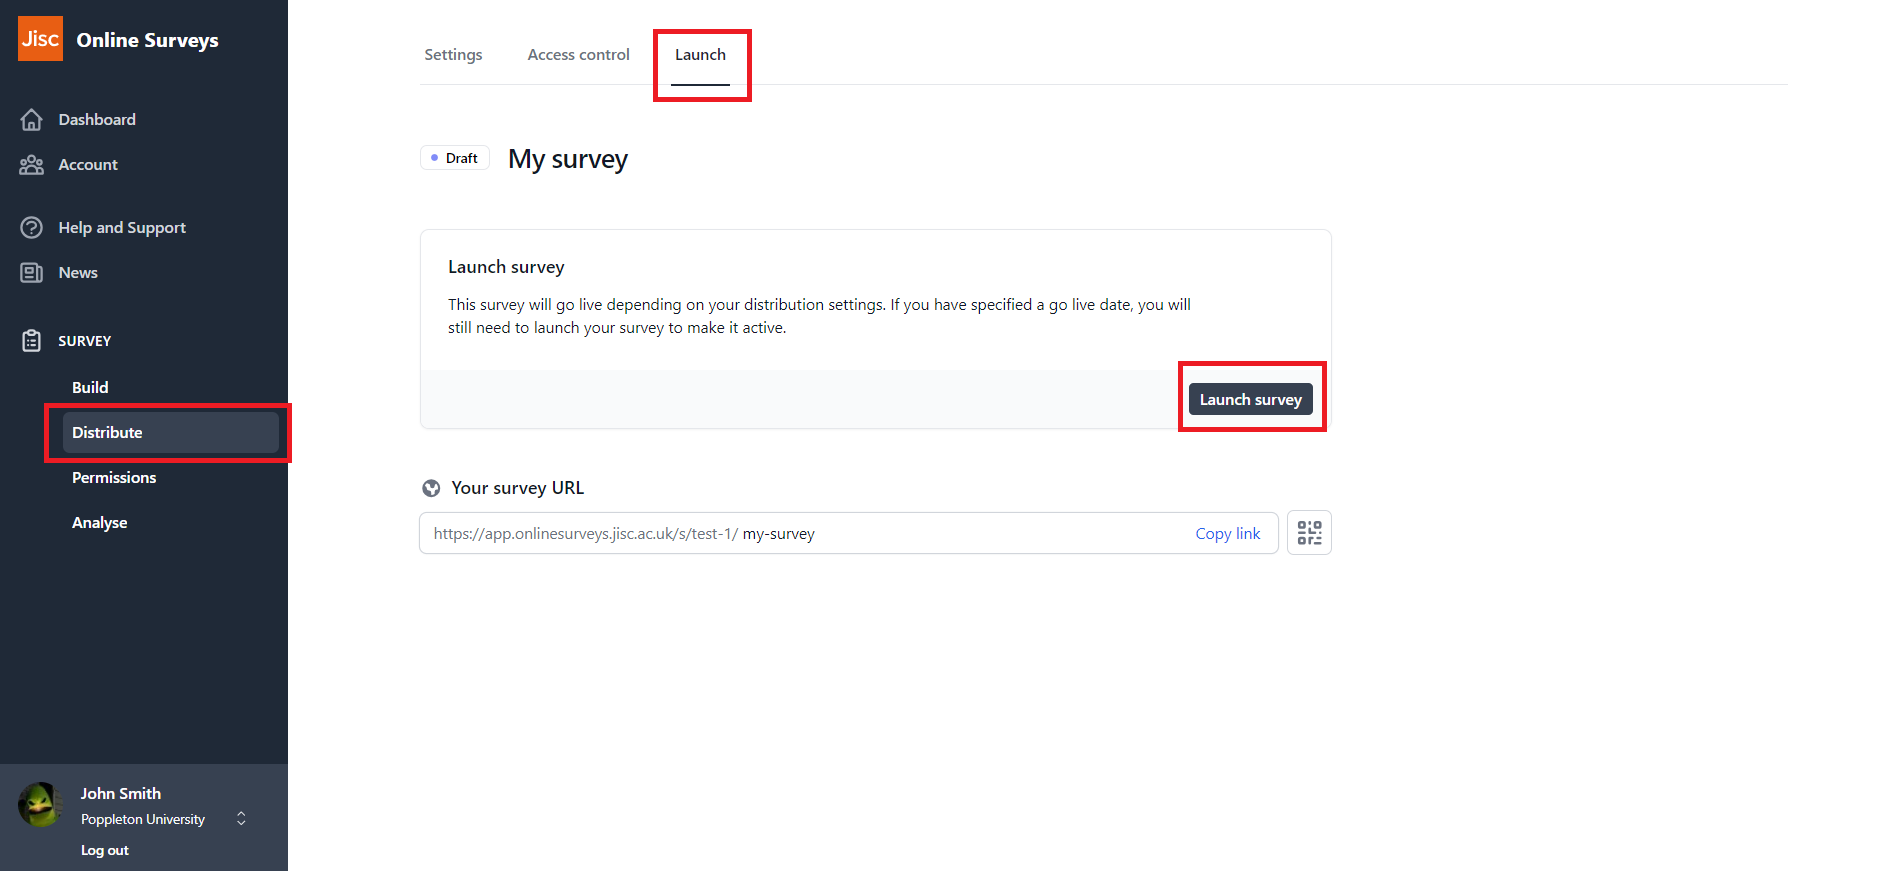 Launch page with Launch survey button highlighted